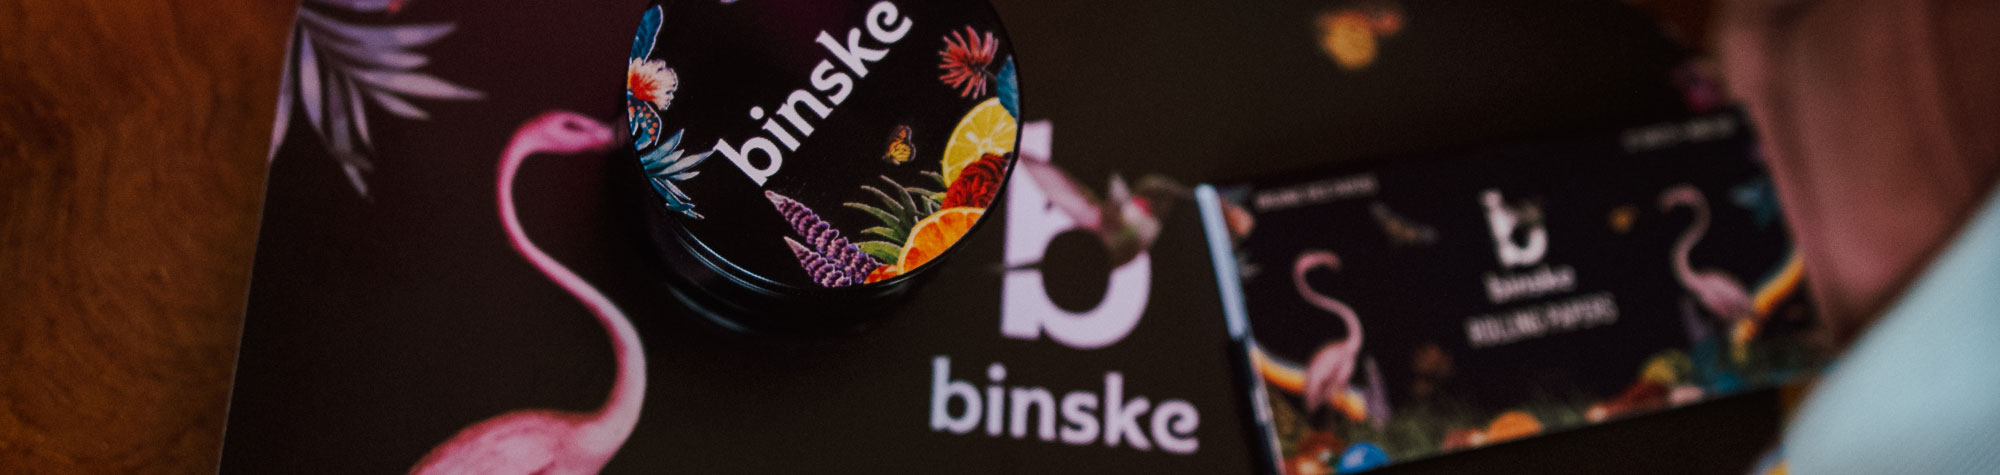 How to create a successful 420 party with binske